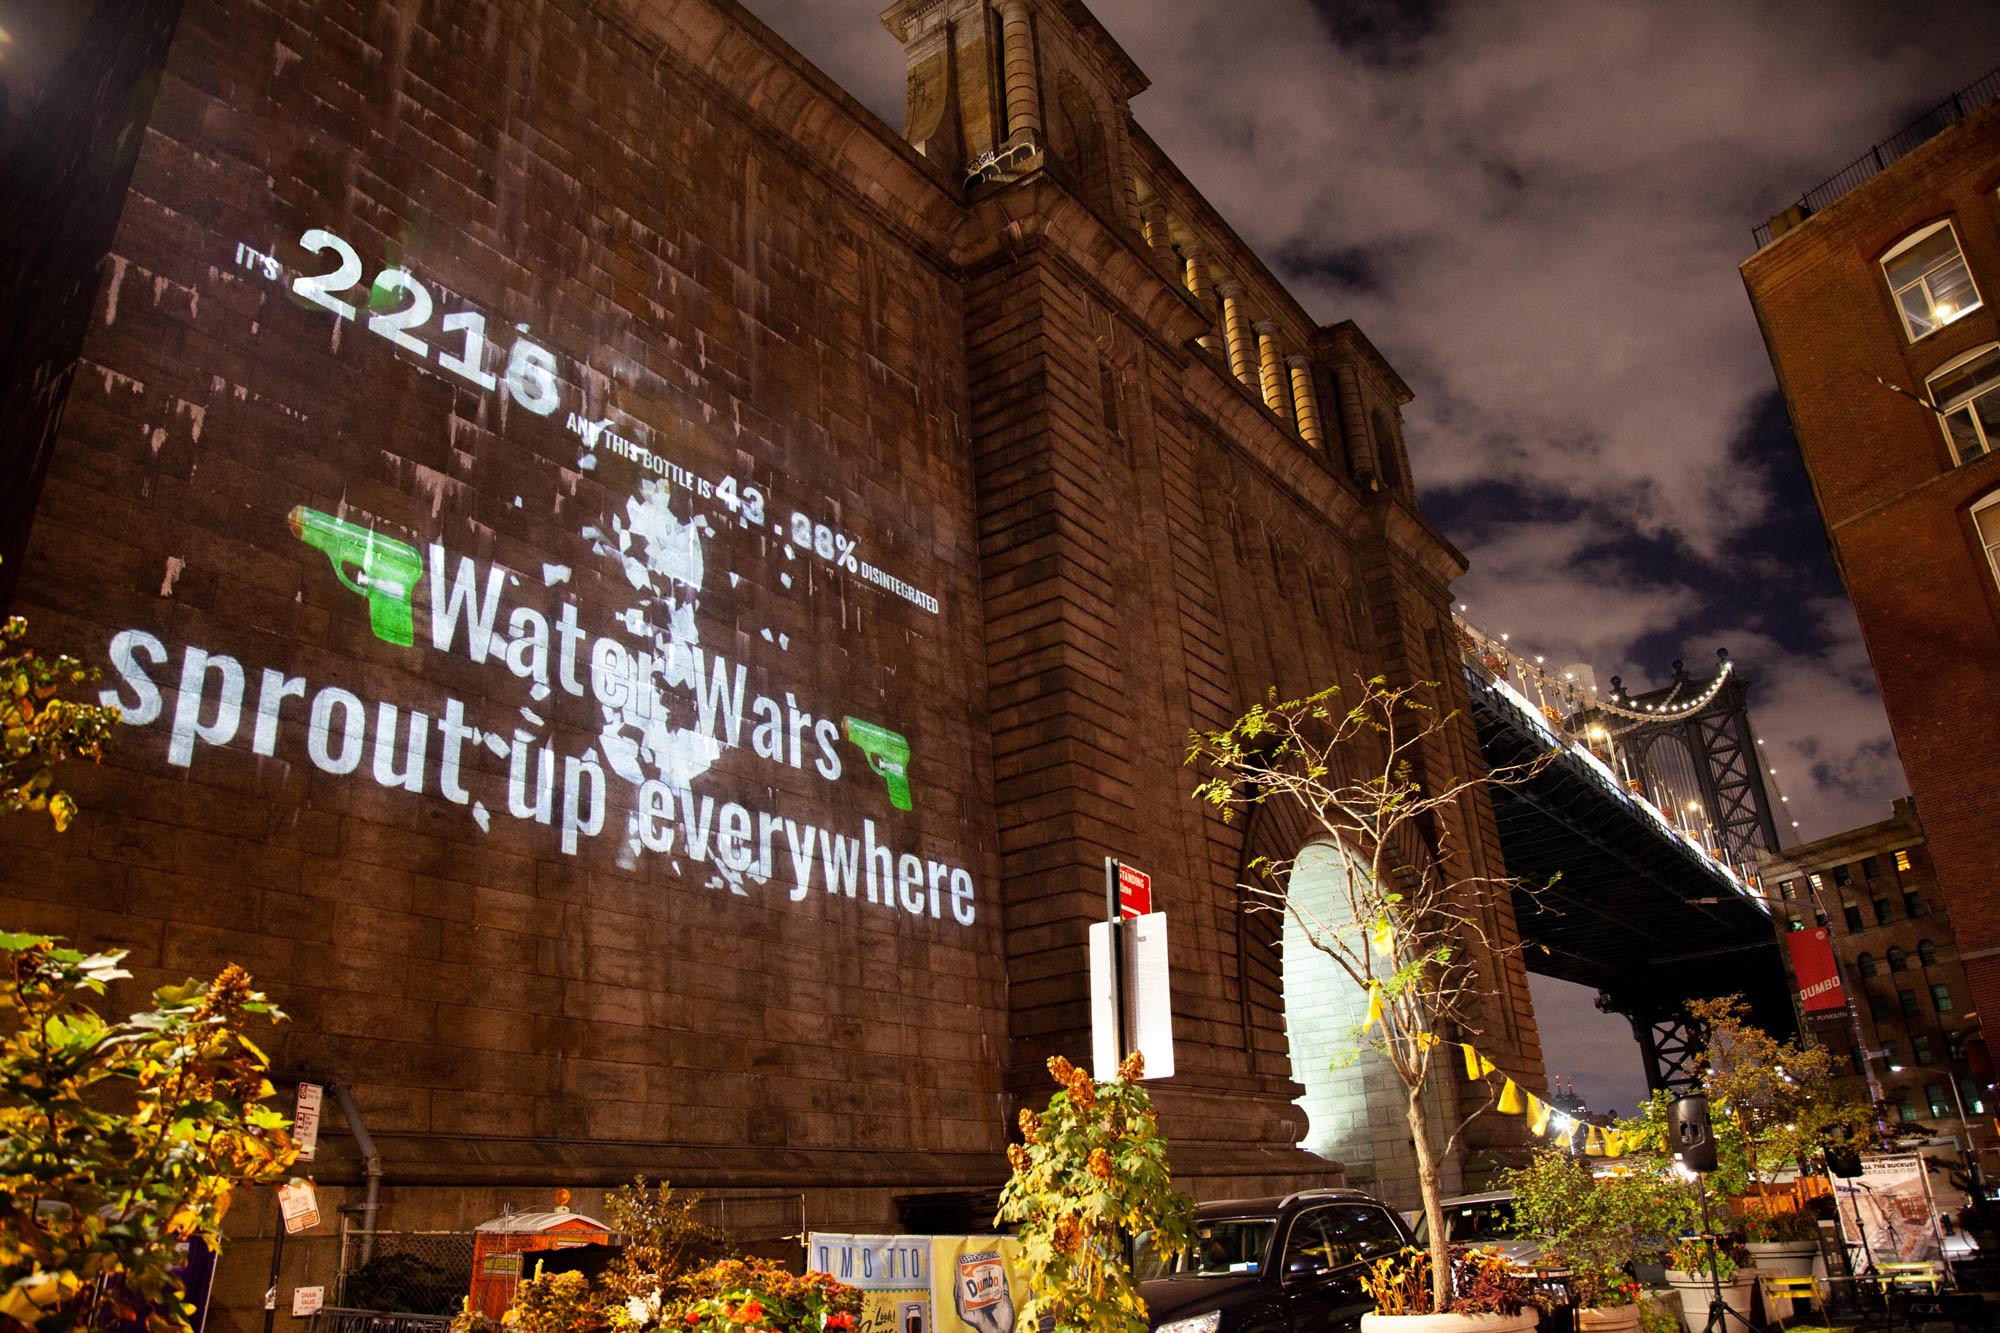 Video of the project projected on the Manhattan Bridge at night. Video contents: 'It is the year 2215, Water Wars sprout up everywhere